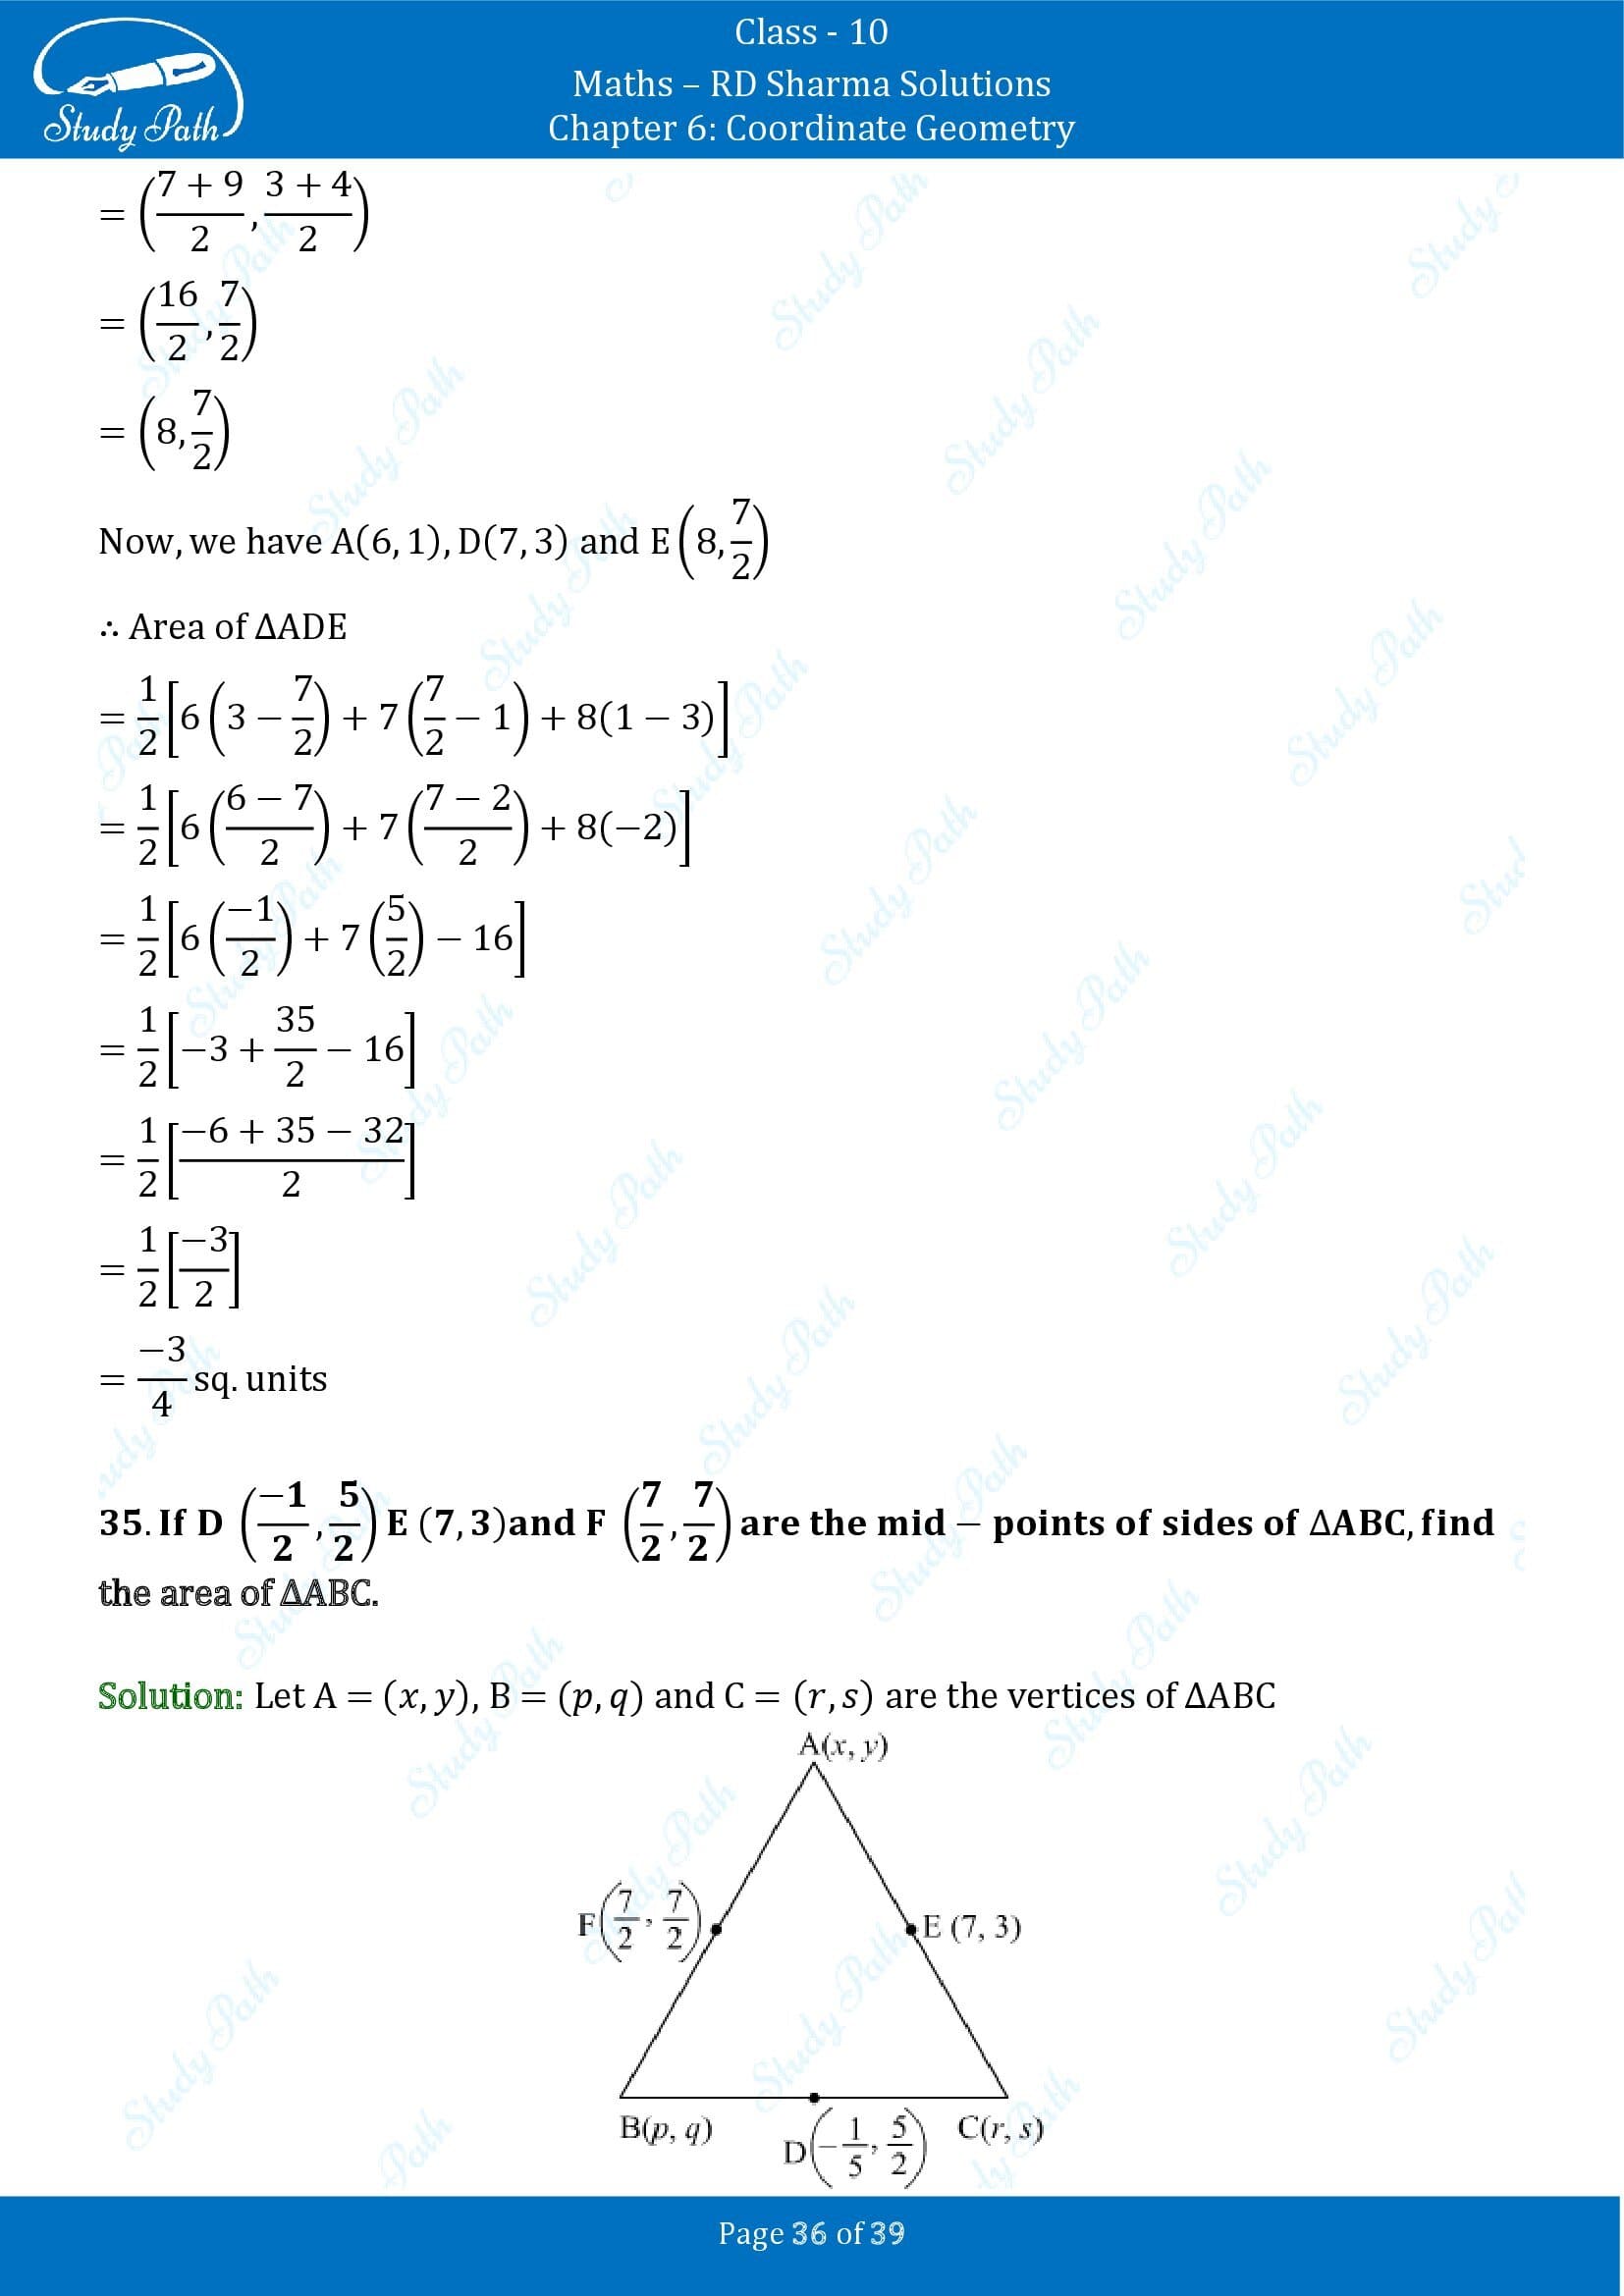 RD Sharma Solutions Class 10 Chapter 6 Coordinate Geometry Exercise 6.5 0036